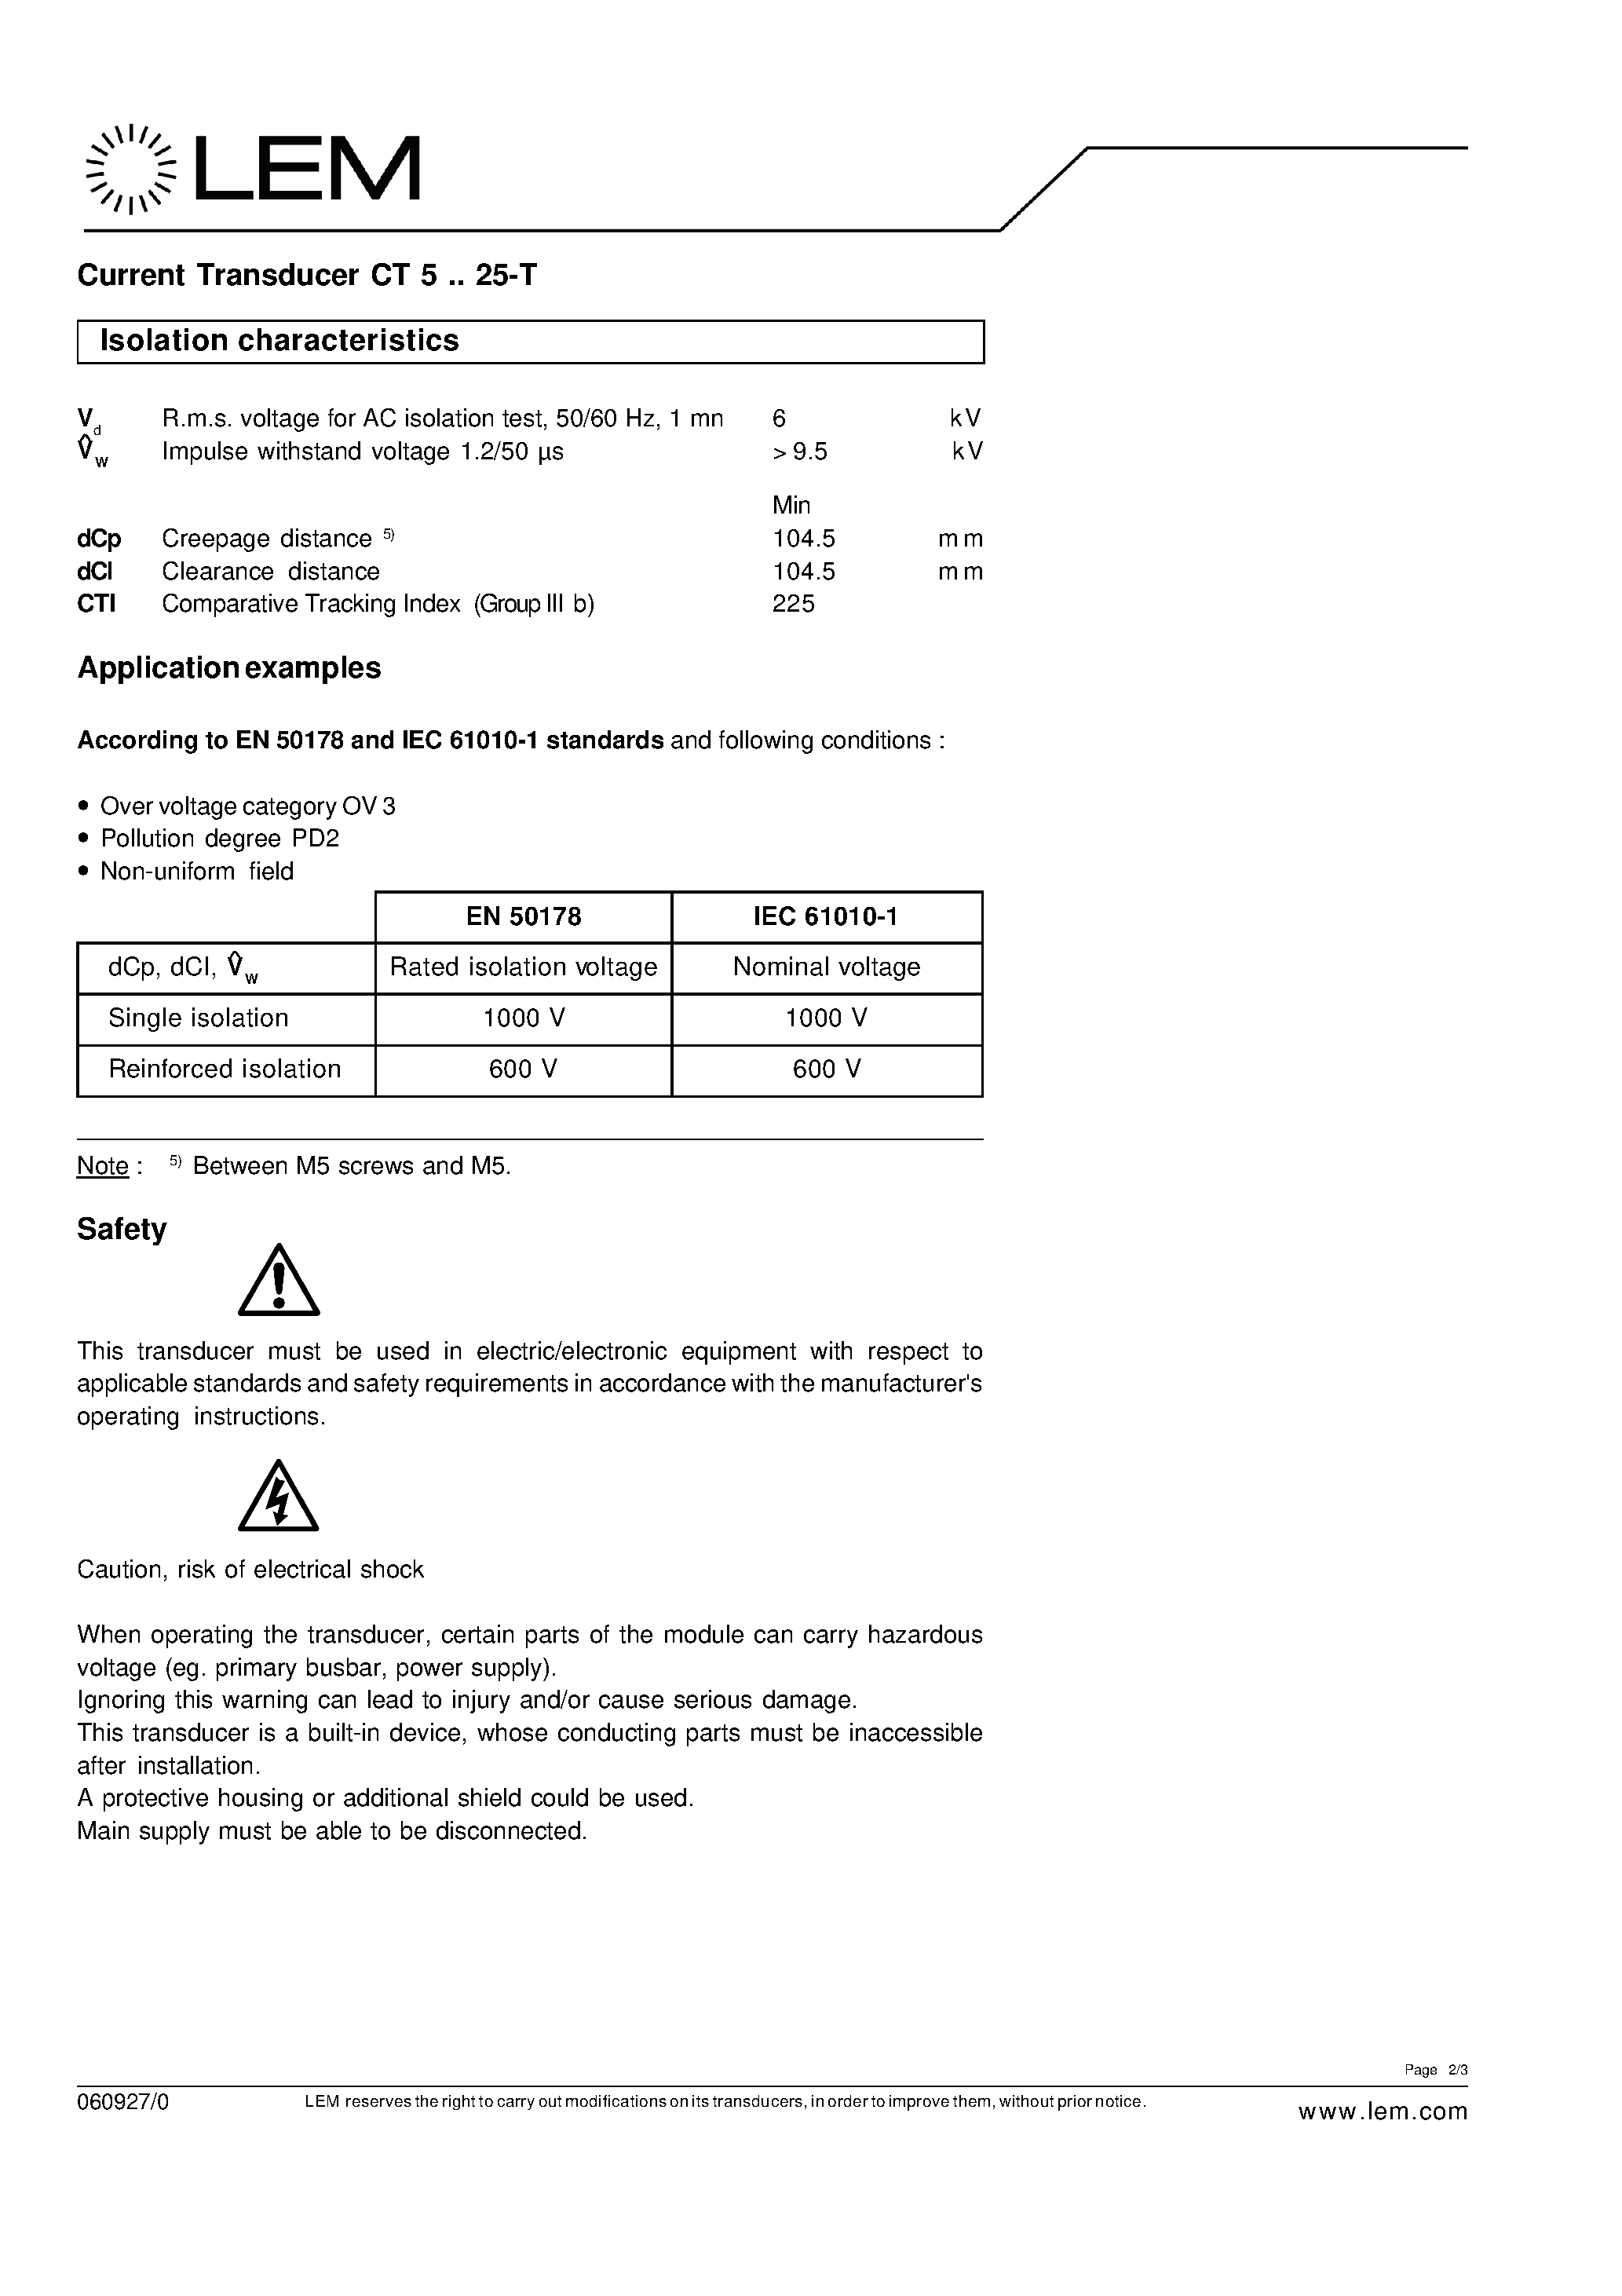 Datasheet CT5-T - Current Transducer page 2